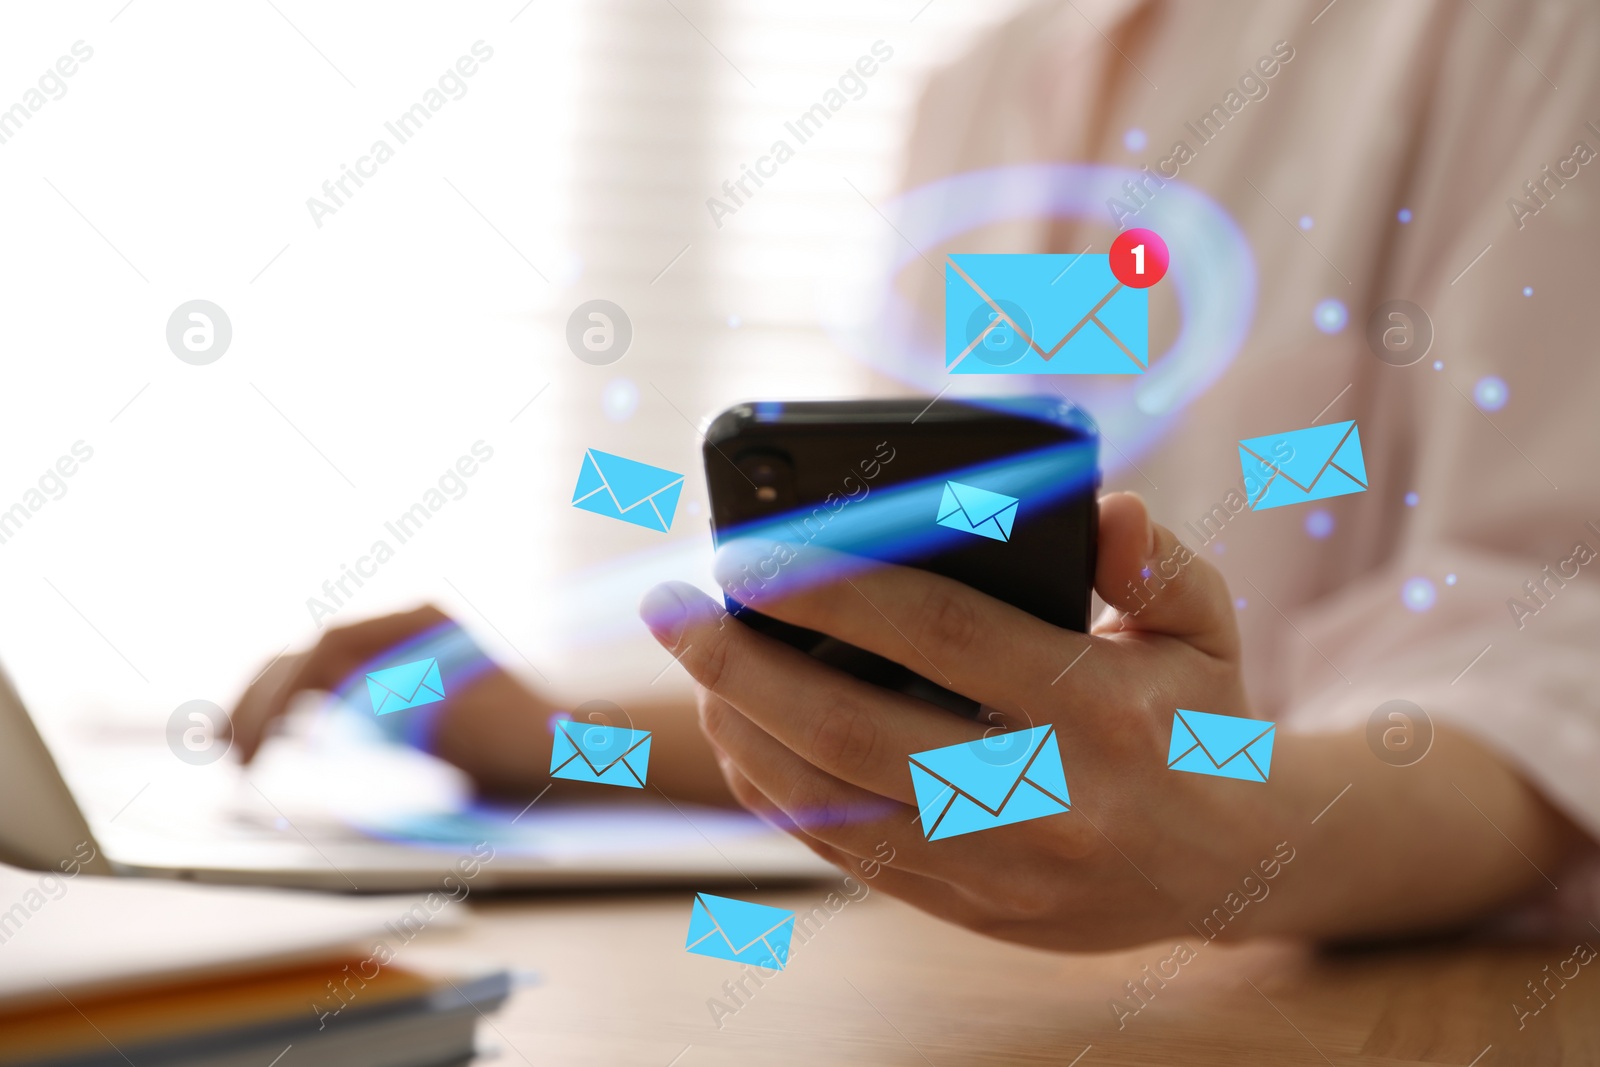 Image of Email. Woman using mobile phone and laptop at table, closeup. Letter illustrations around device